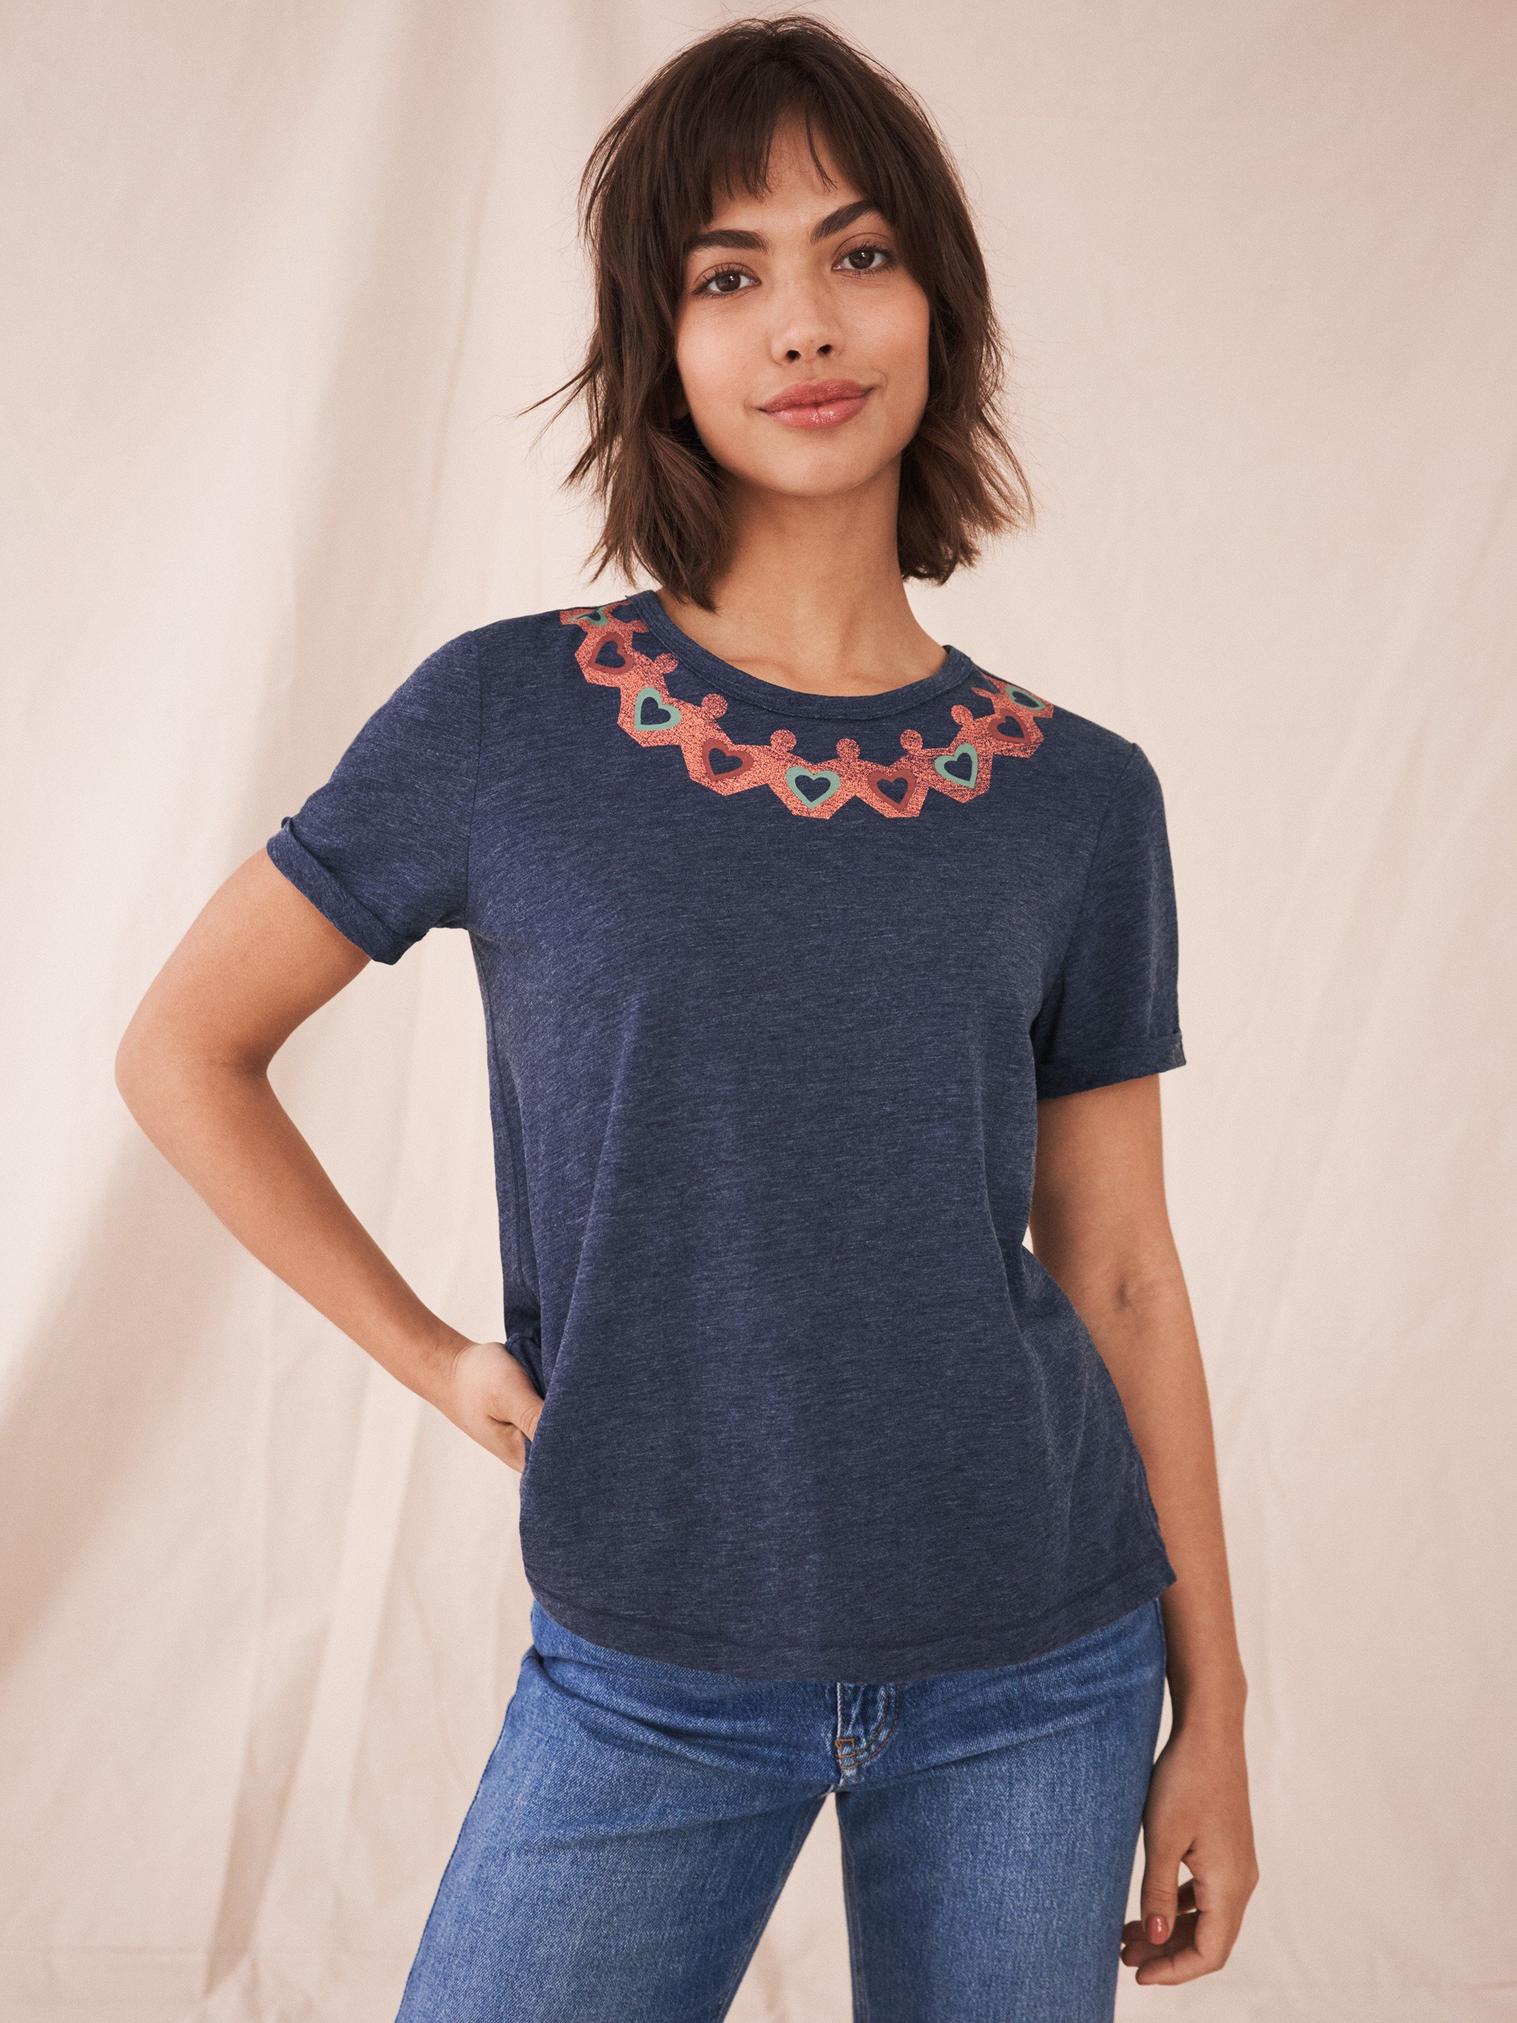 Home start a Hug Was Here Tee in NAVY MULTI - MODEL FRONT